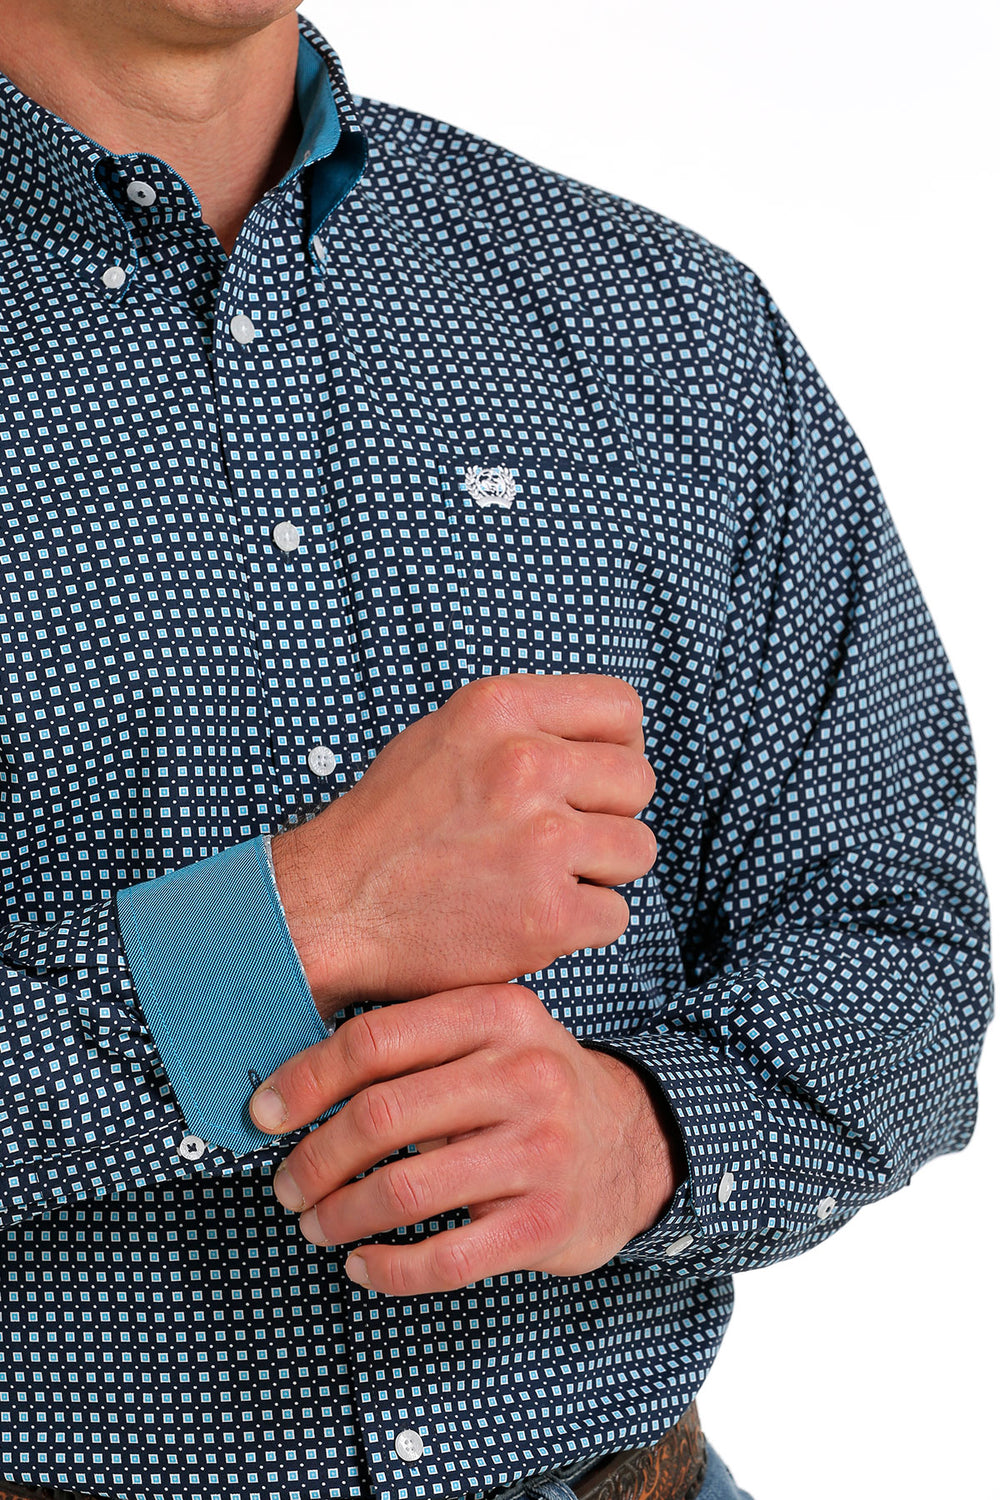 cuff and pocket detail